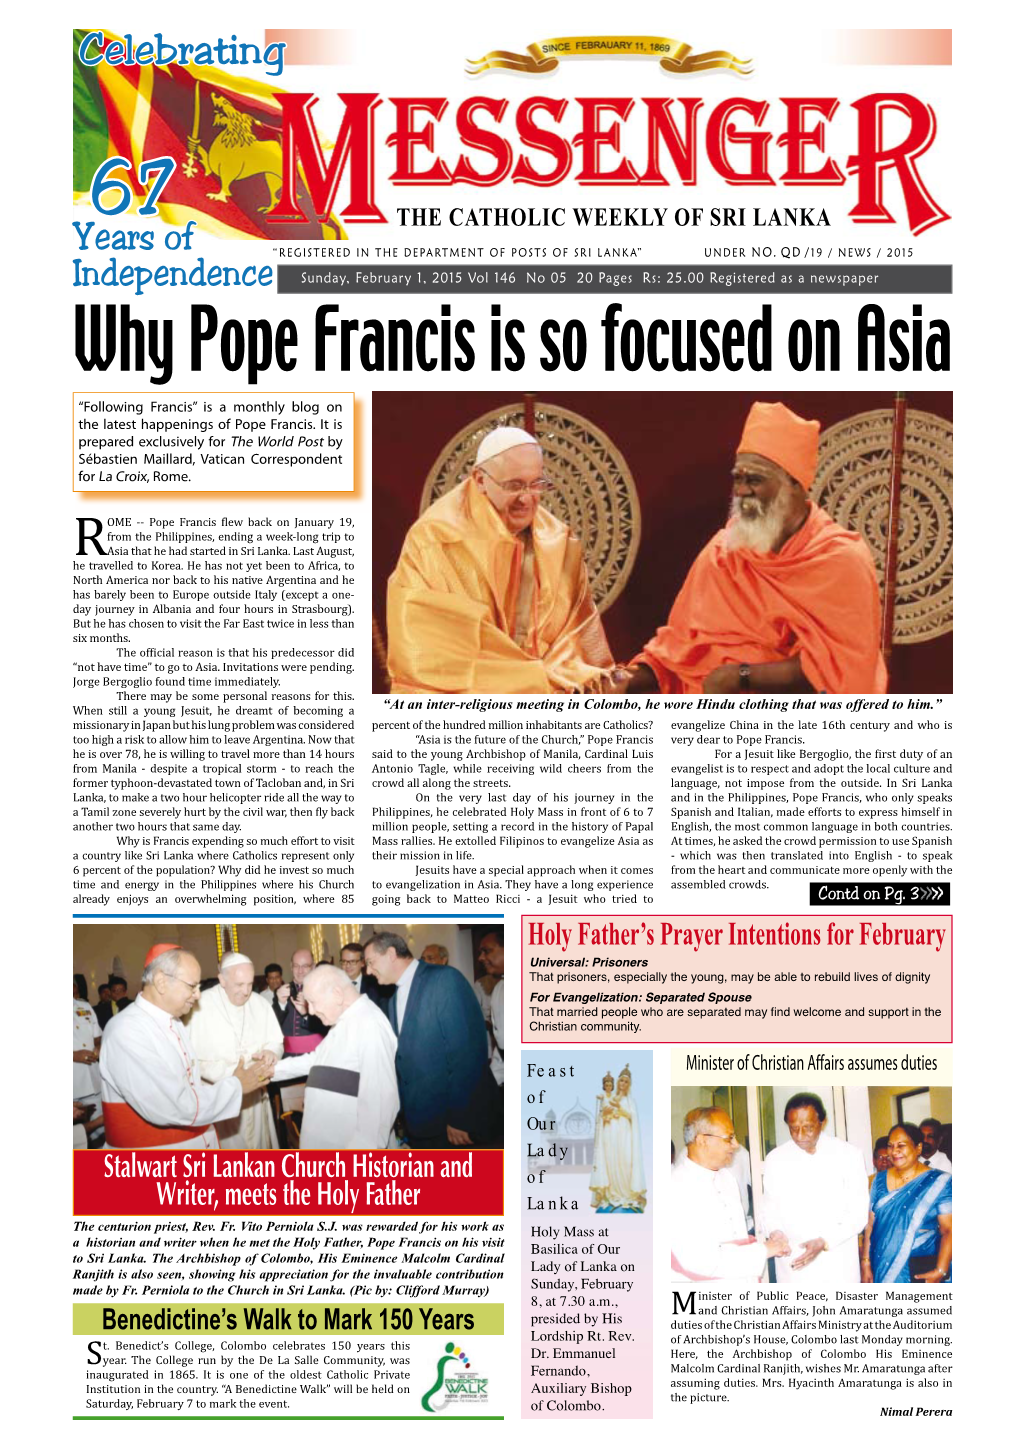 Why Pope Francis Is So Focused on Asia “Following Francis” Is a Monthly Blog on the Latest Happenings of Pope Francis